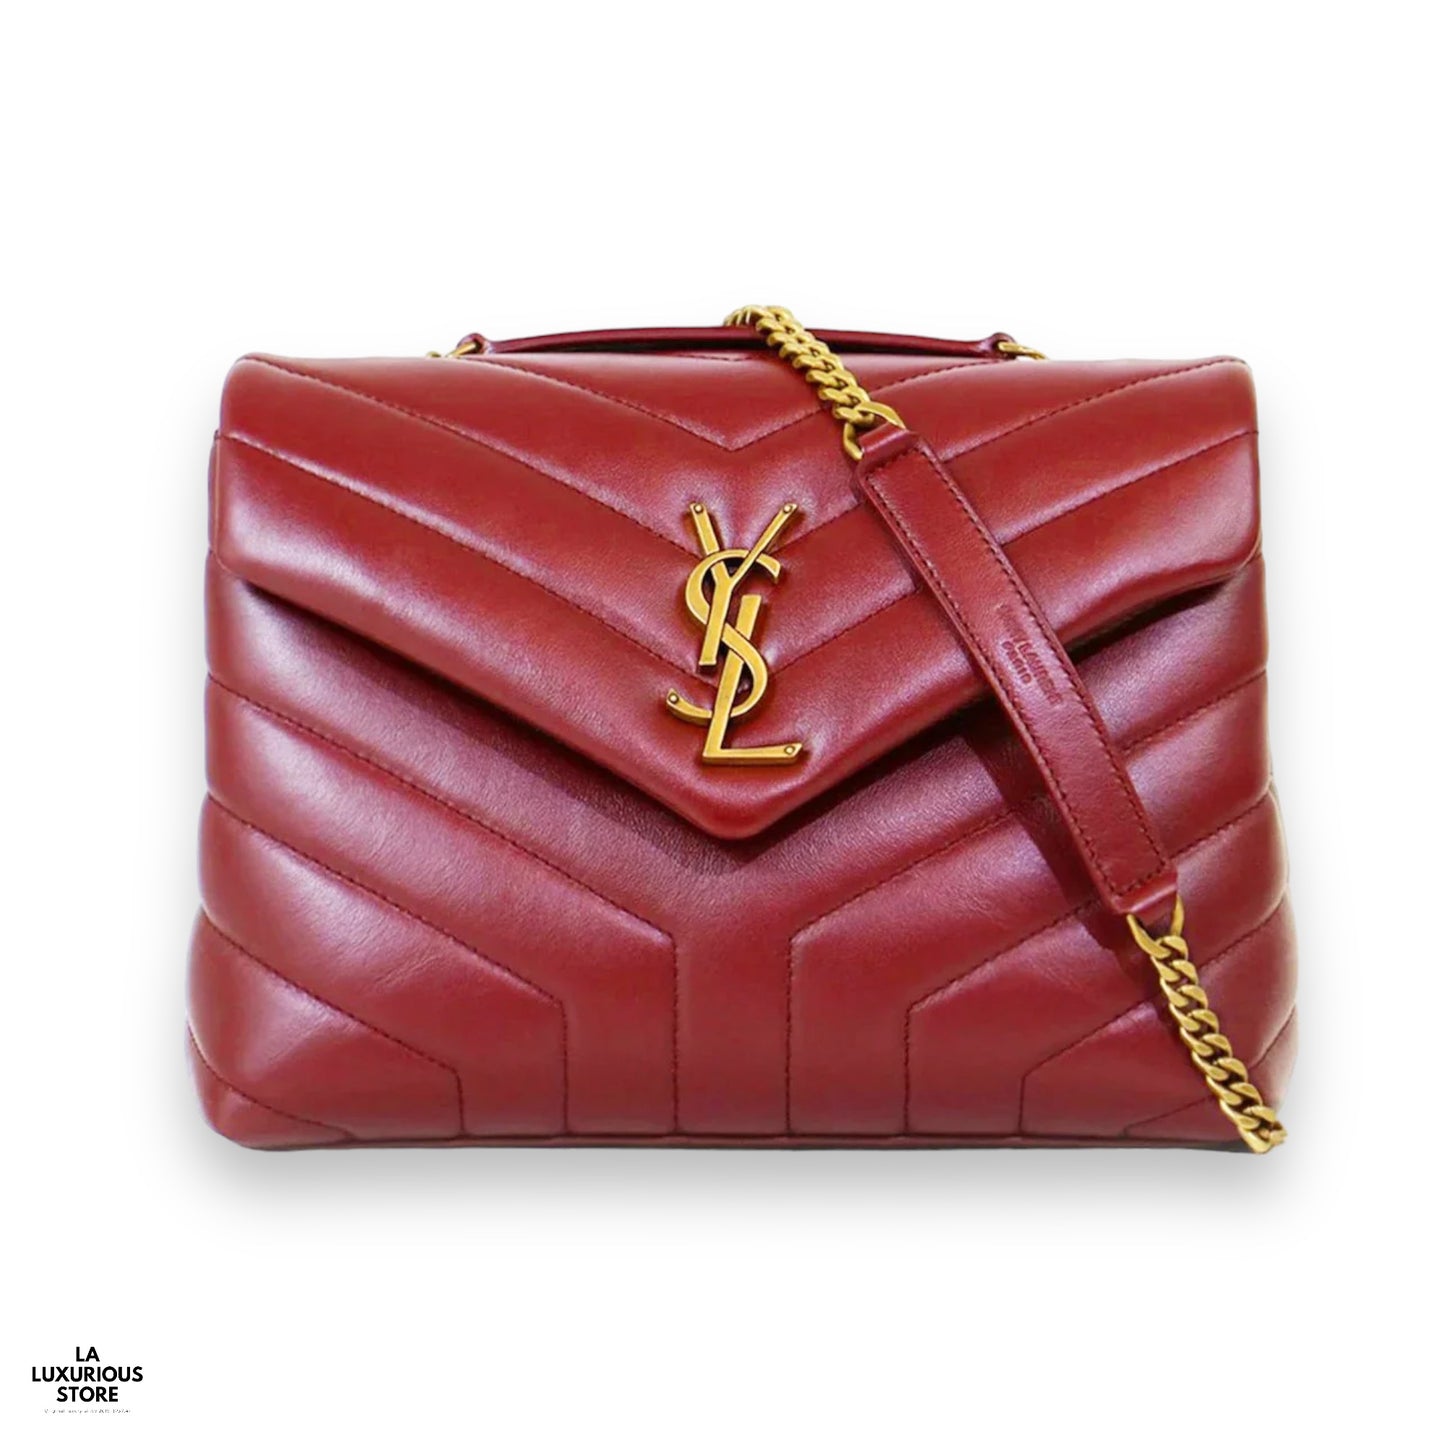 YSL LOULOU RED SMALL